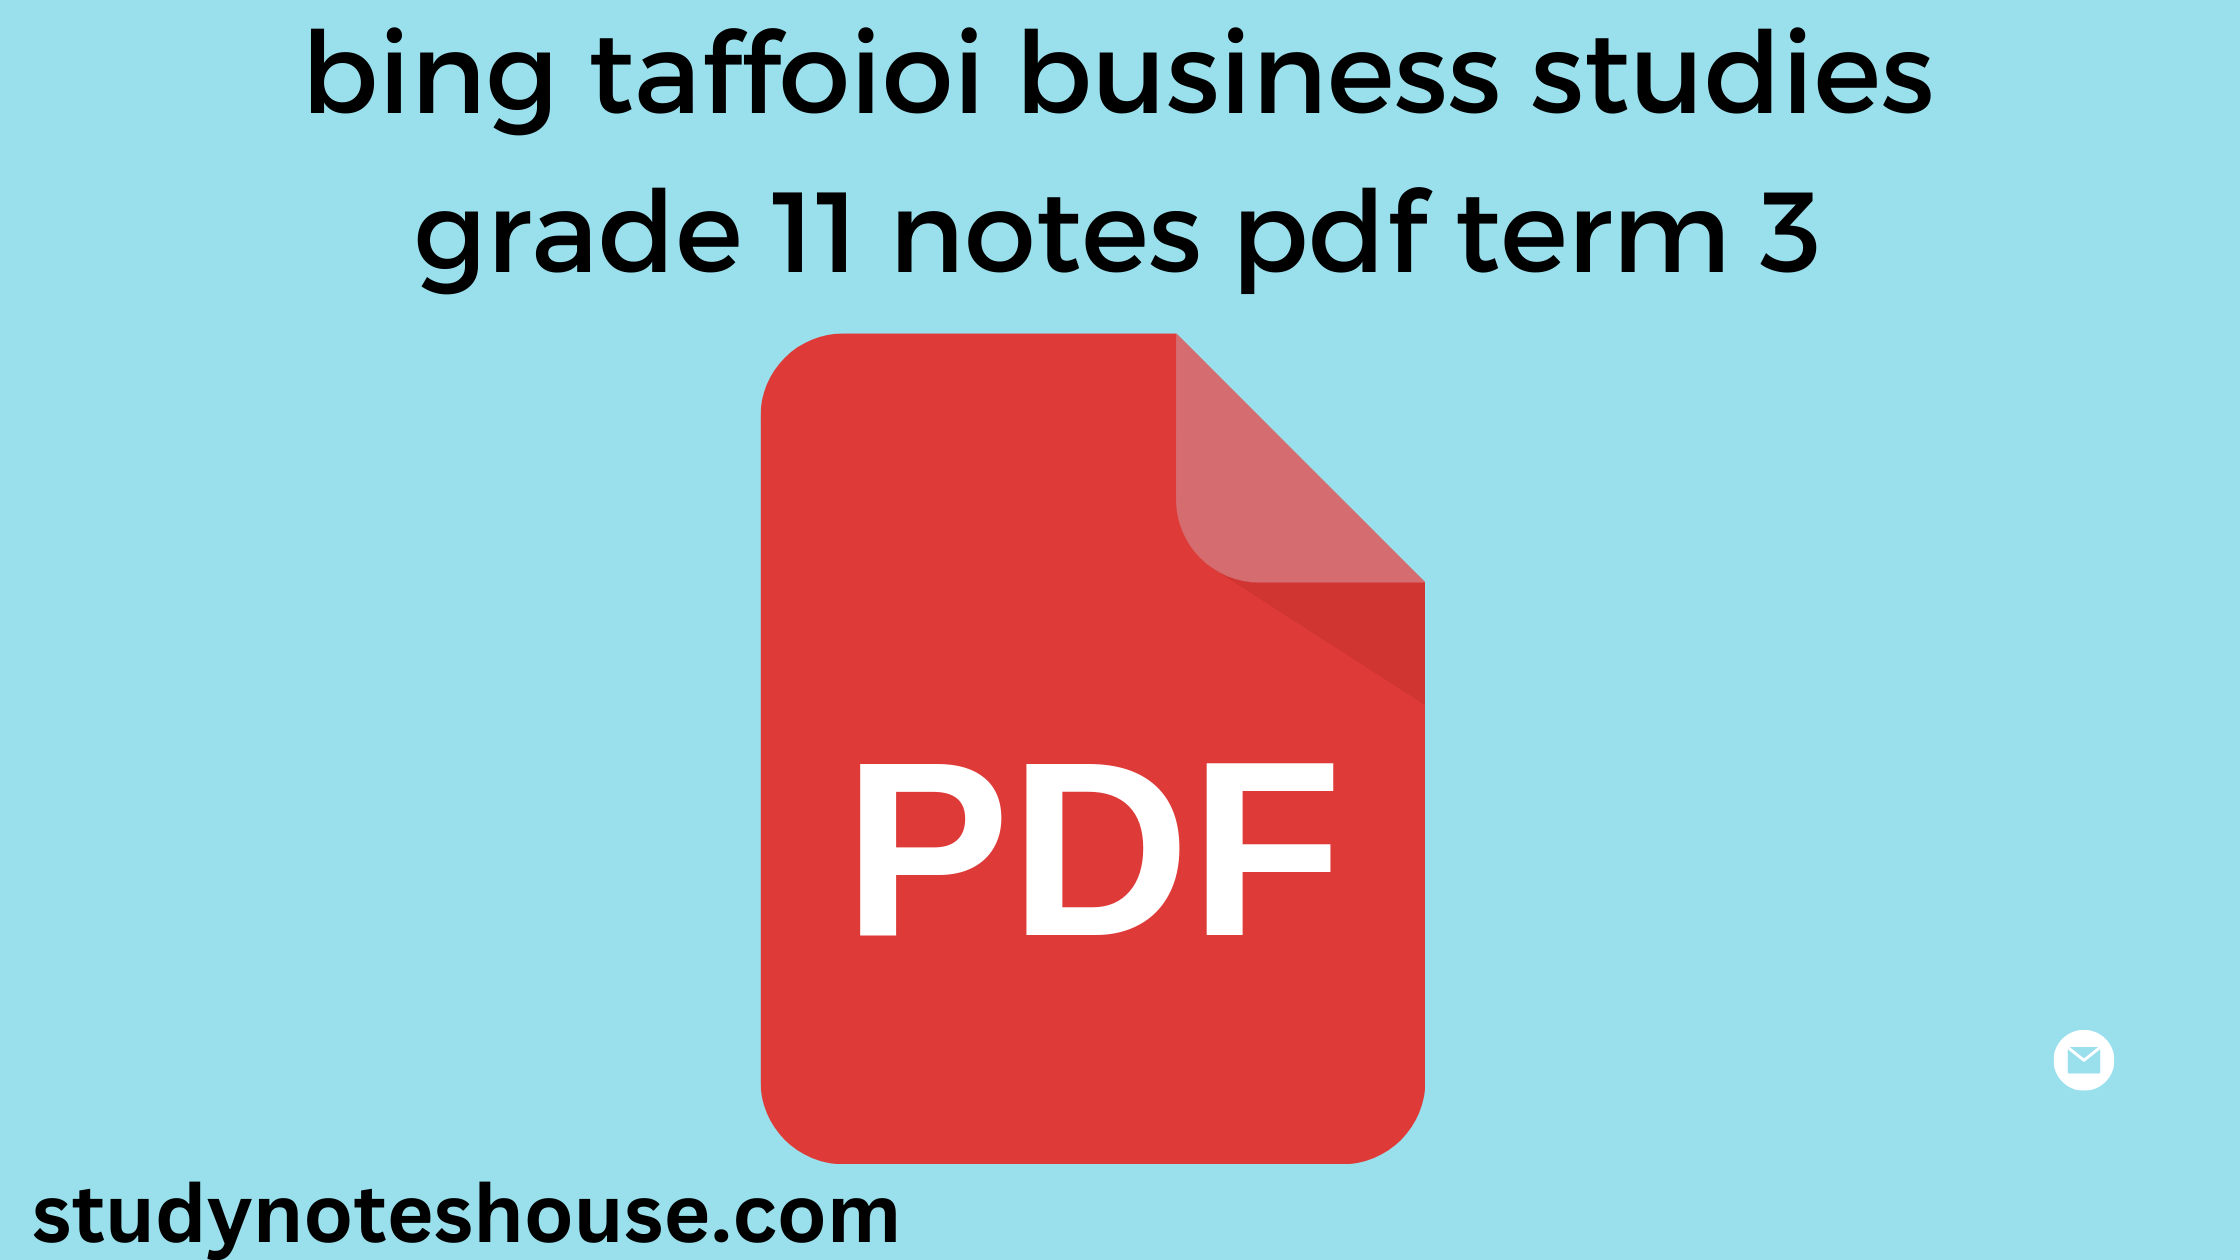 bing taffoioi business studies grade 11 notes pdf term 3 you will find the best pdf than pdf drive all we have unique content here you can download all types of free pdf from here study notes